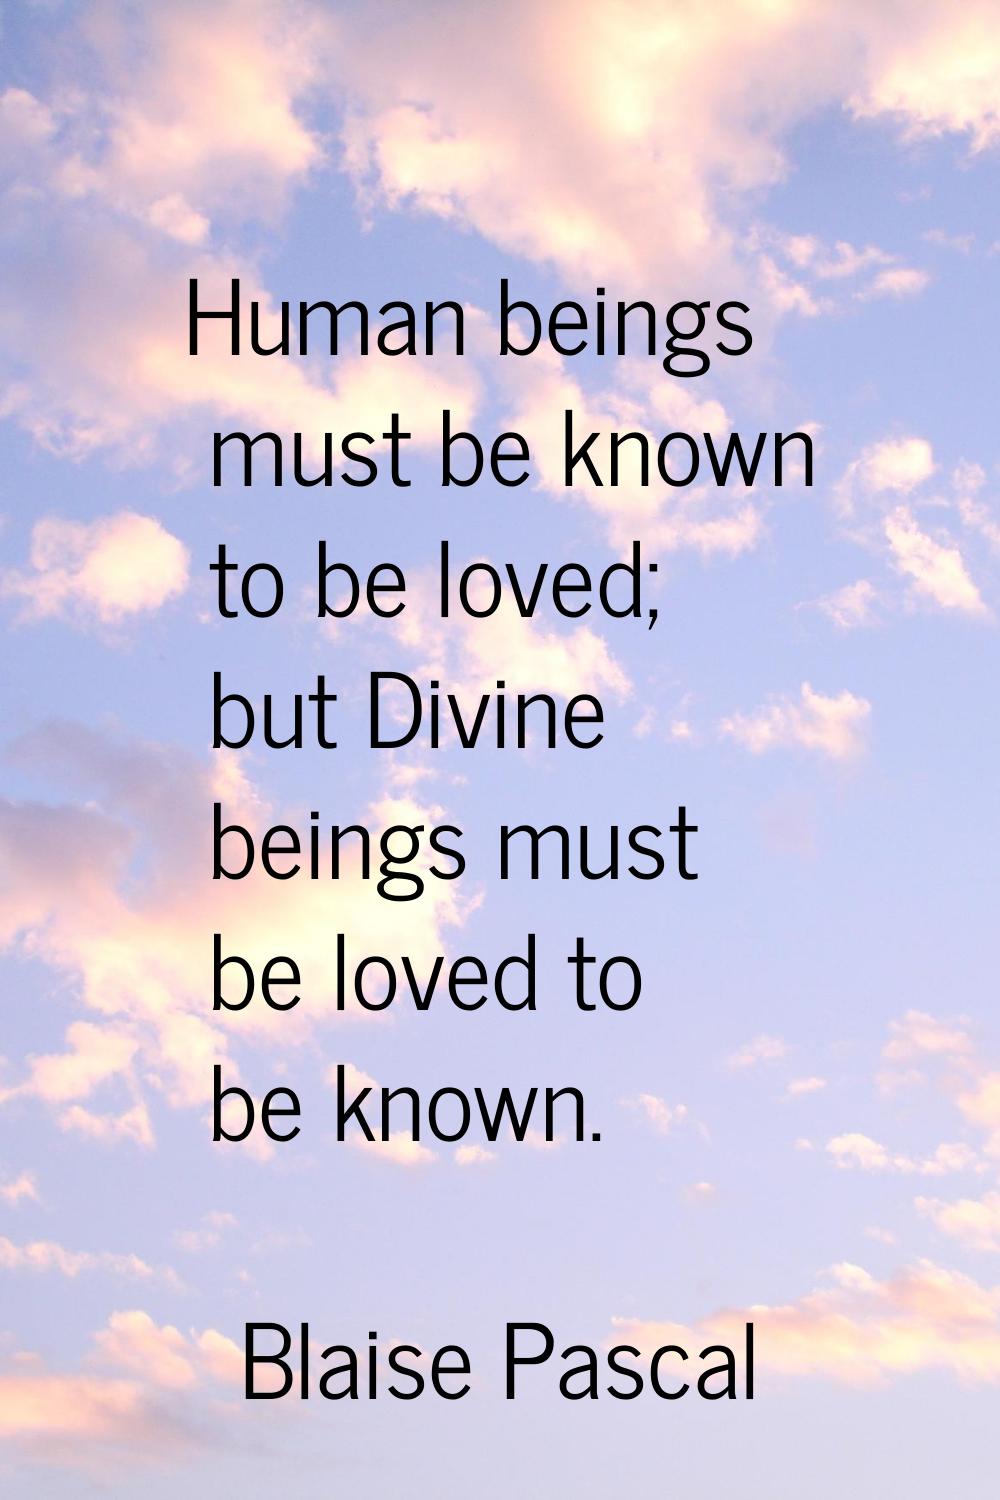 Human beings must be known to be loved; but Divine beings must be loved to be known.